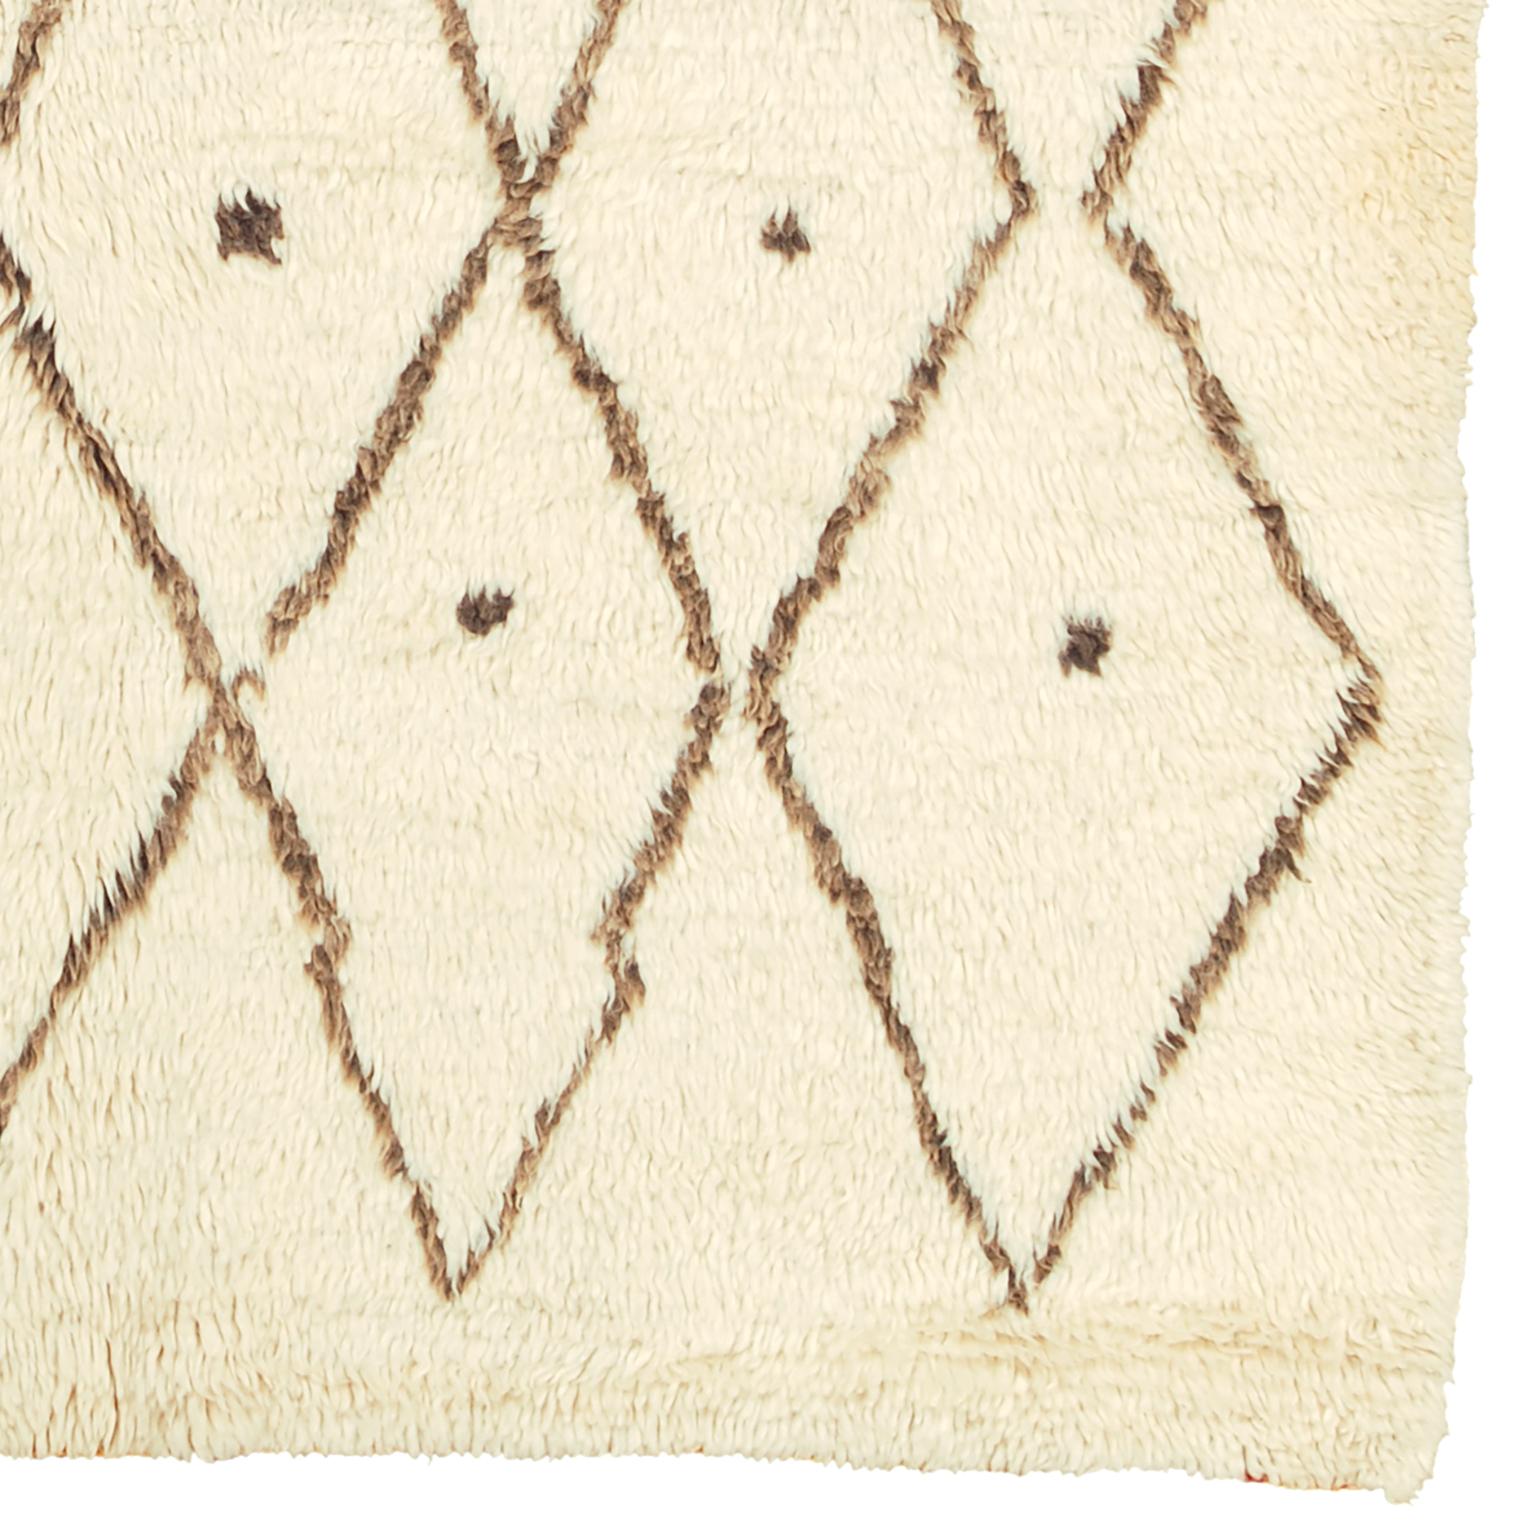 Mid-20th century Moroccan Beni Ouarain rug
Morocco, mid-20th century
Handwoven with wool
Featuring traditional diamond design, natural wool background and brown wool lines.